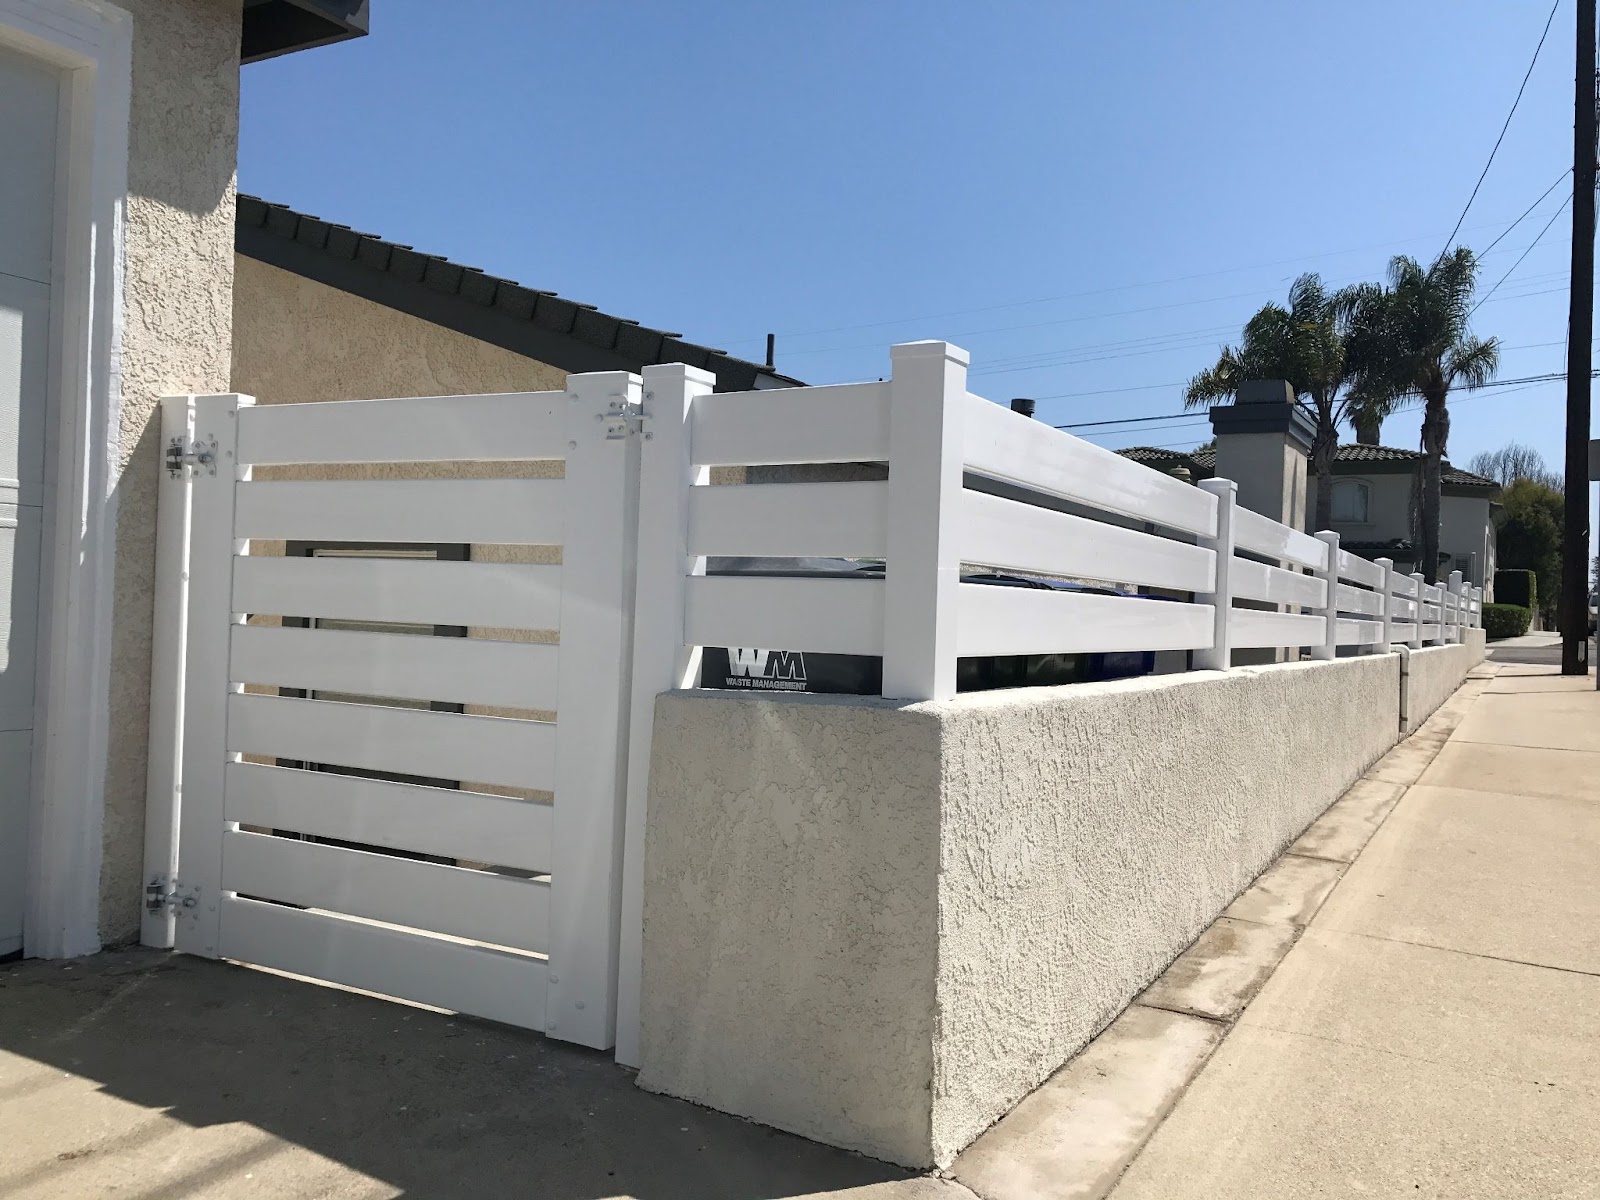 High Quality Vinyl Fence Extensions